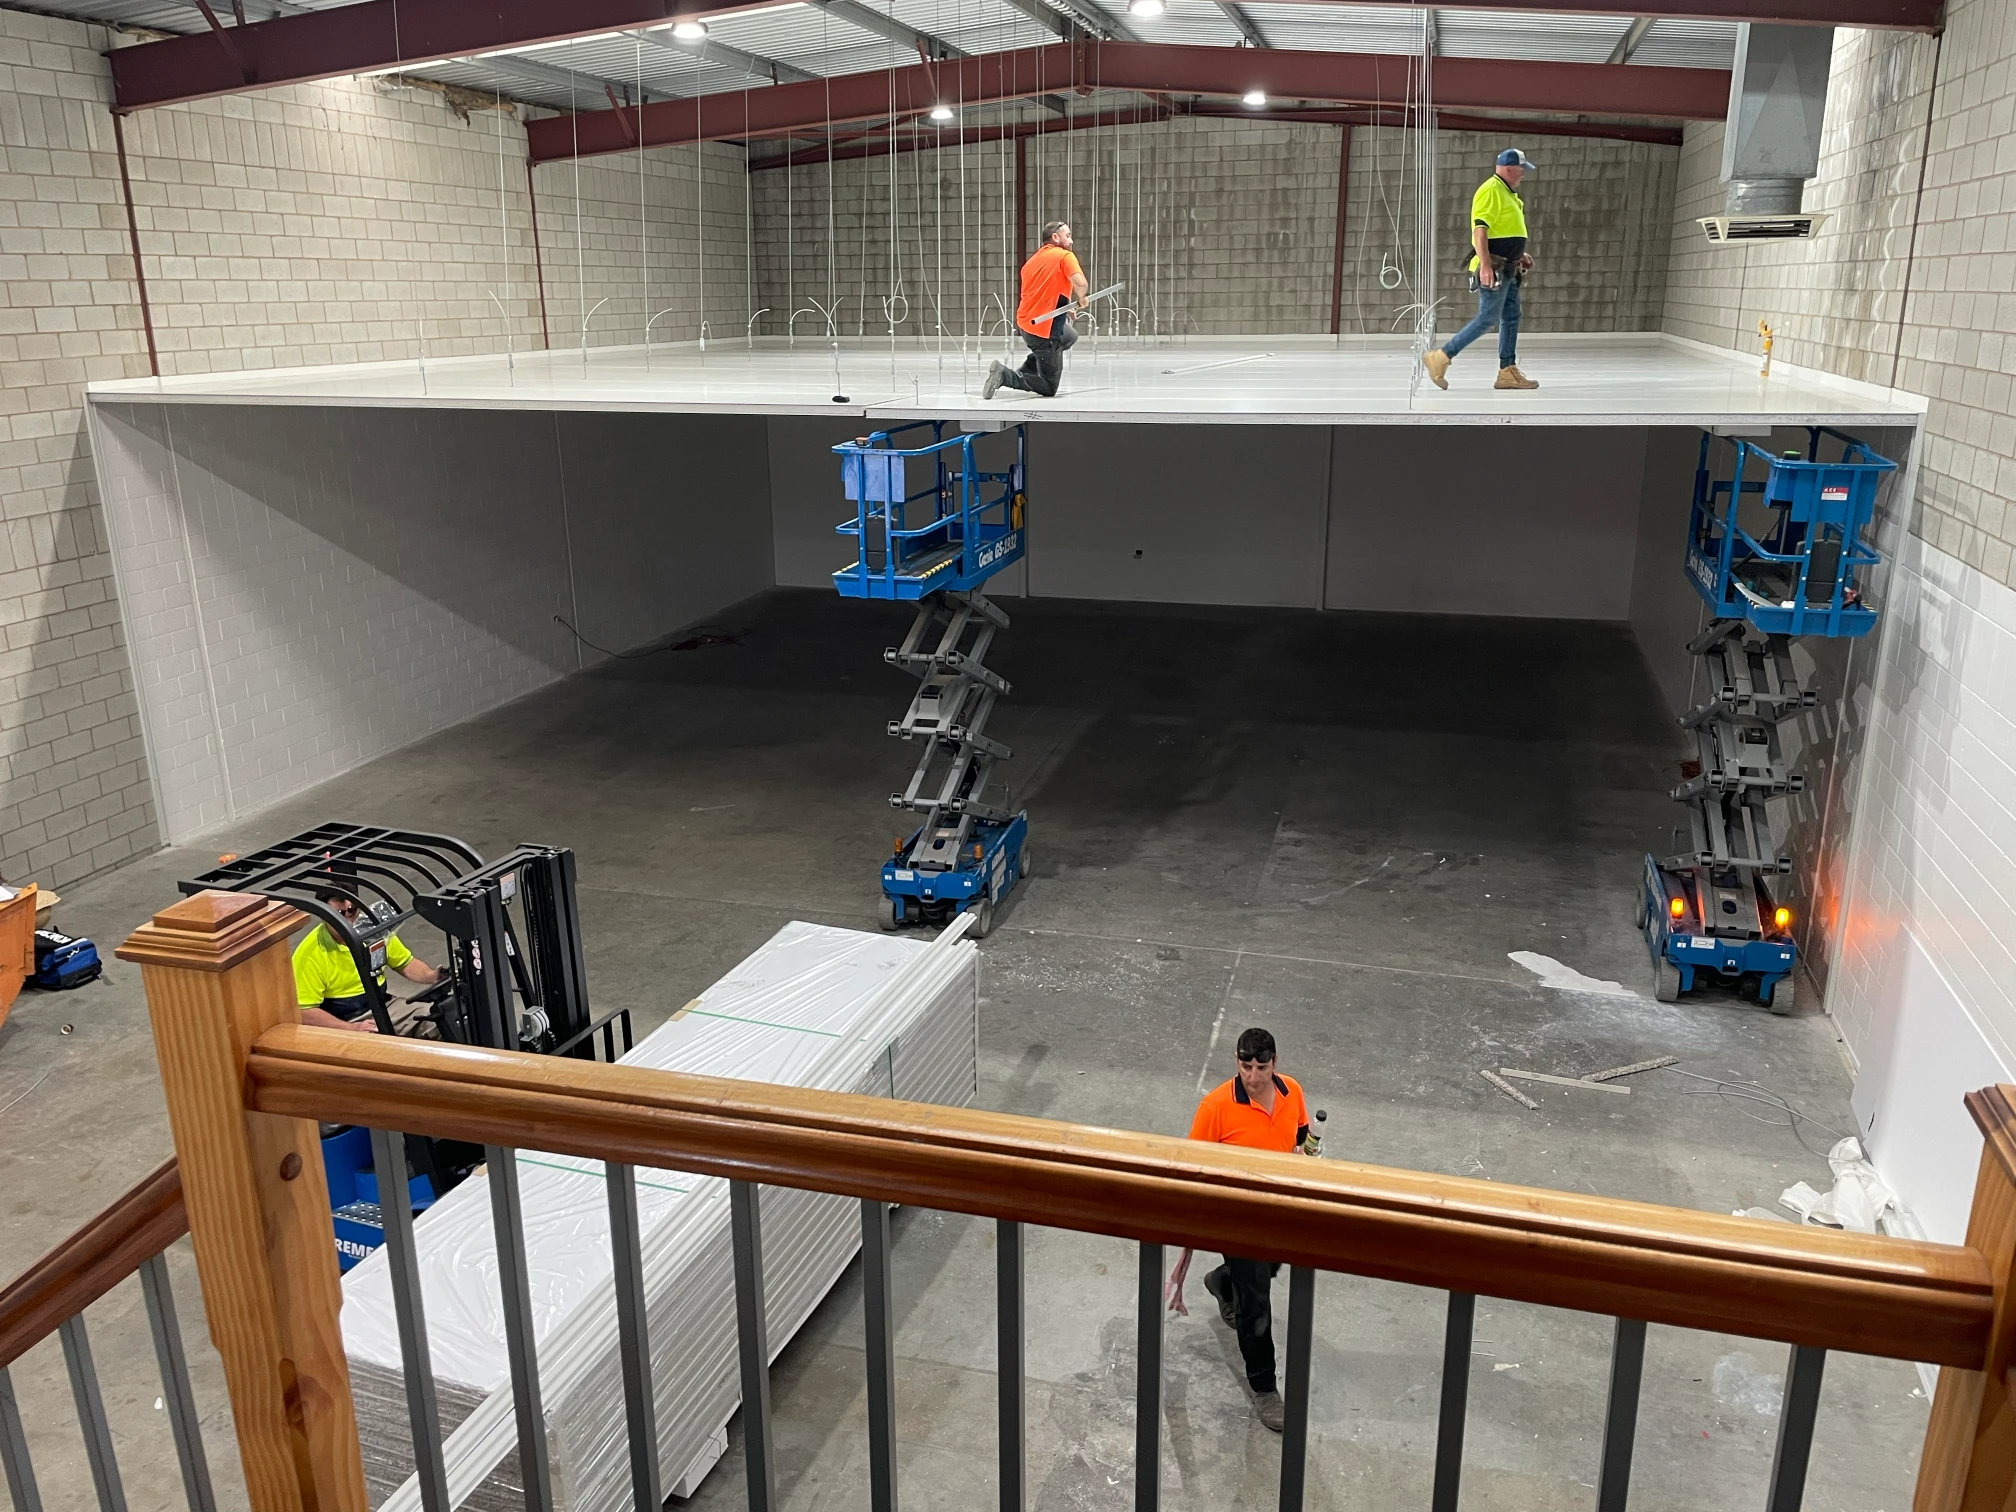 Labourers working on the construction of Maipac Coffee Pod Warehouse in Adelaide